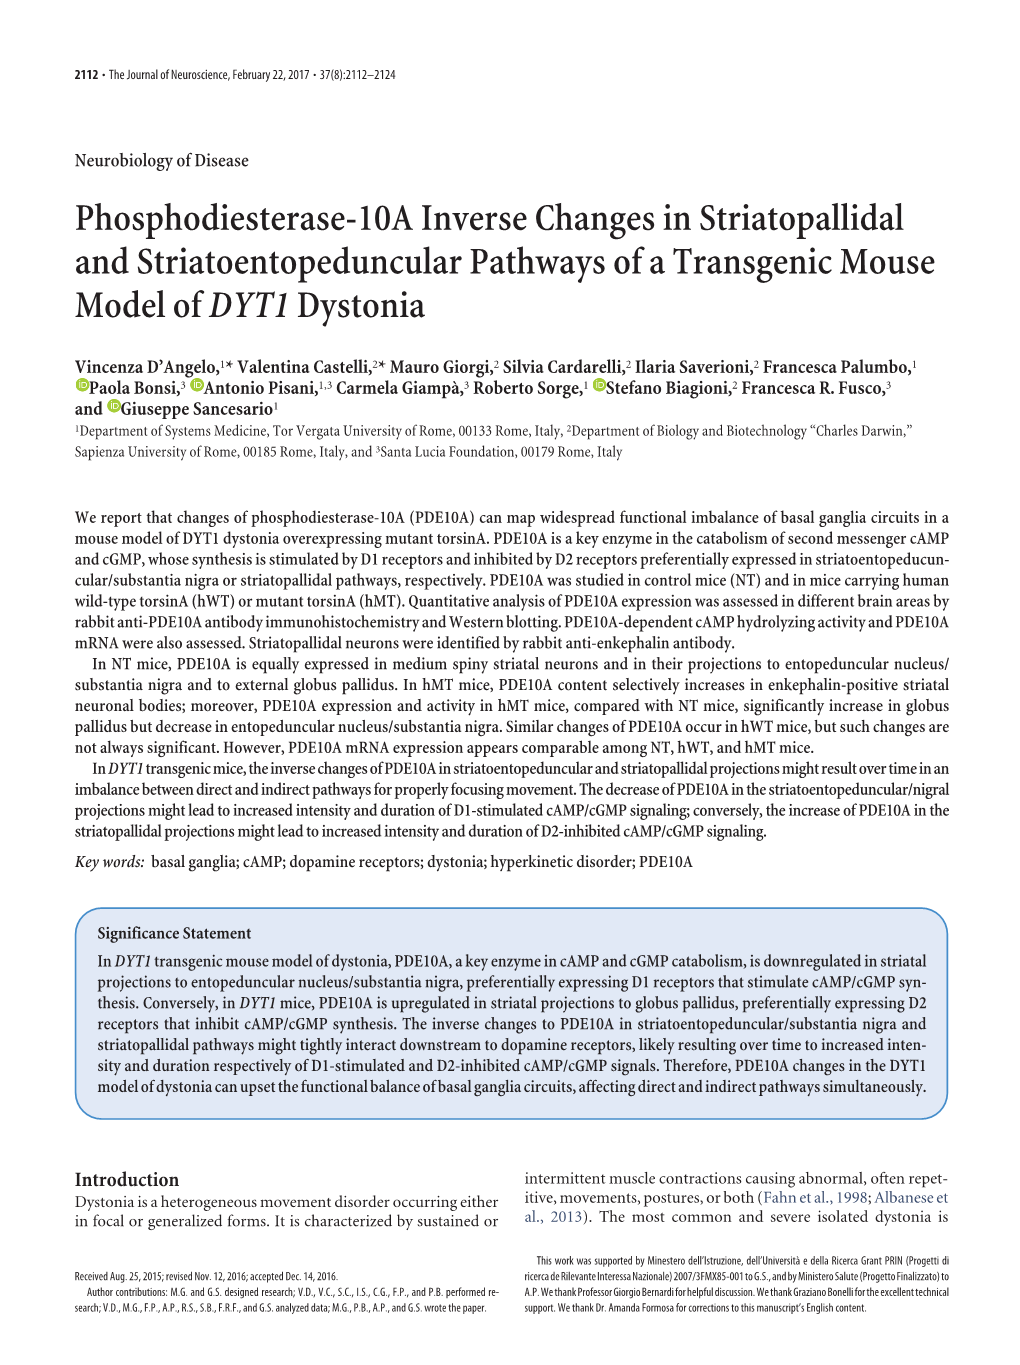 Phosphodiesterase-10A Inverse Changes in Striatopallidal and Striatoentopeduncular Pathways of a Transgenic Mouse Model of DYT1 Dystonia